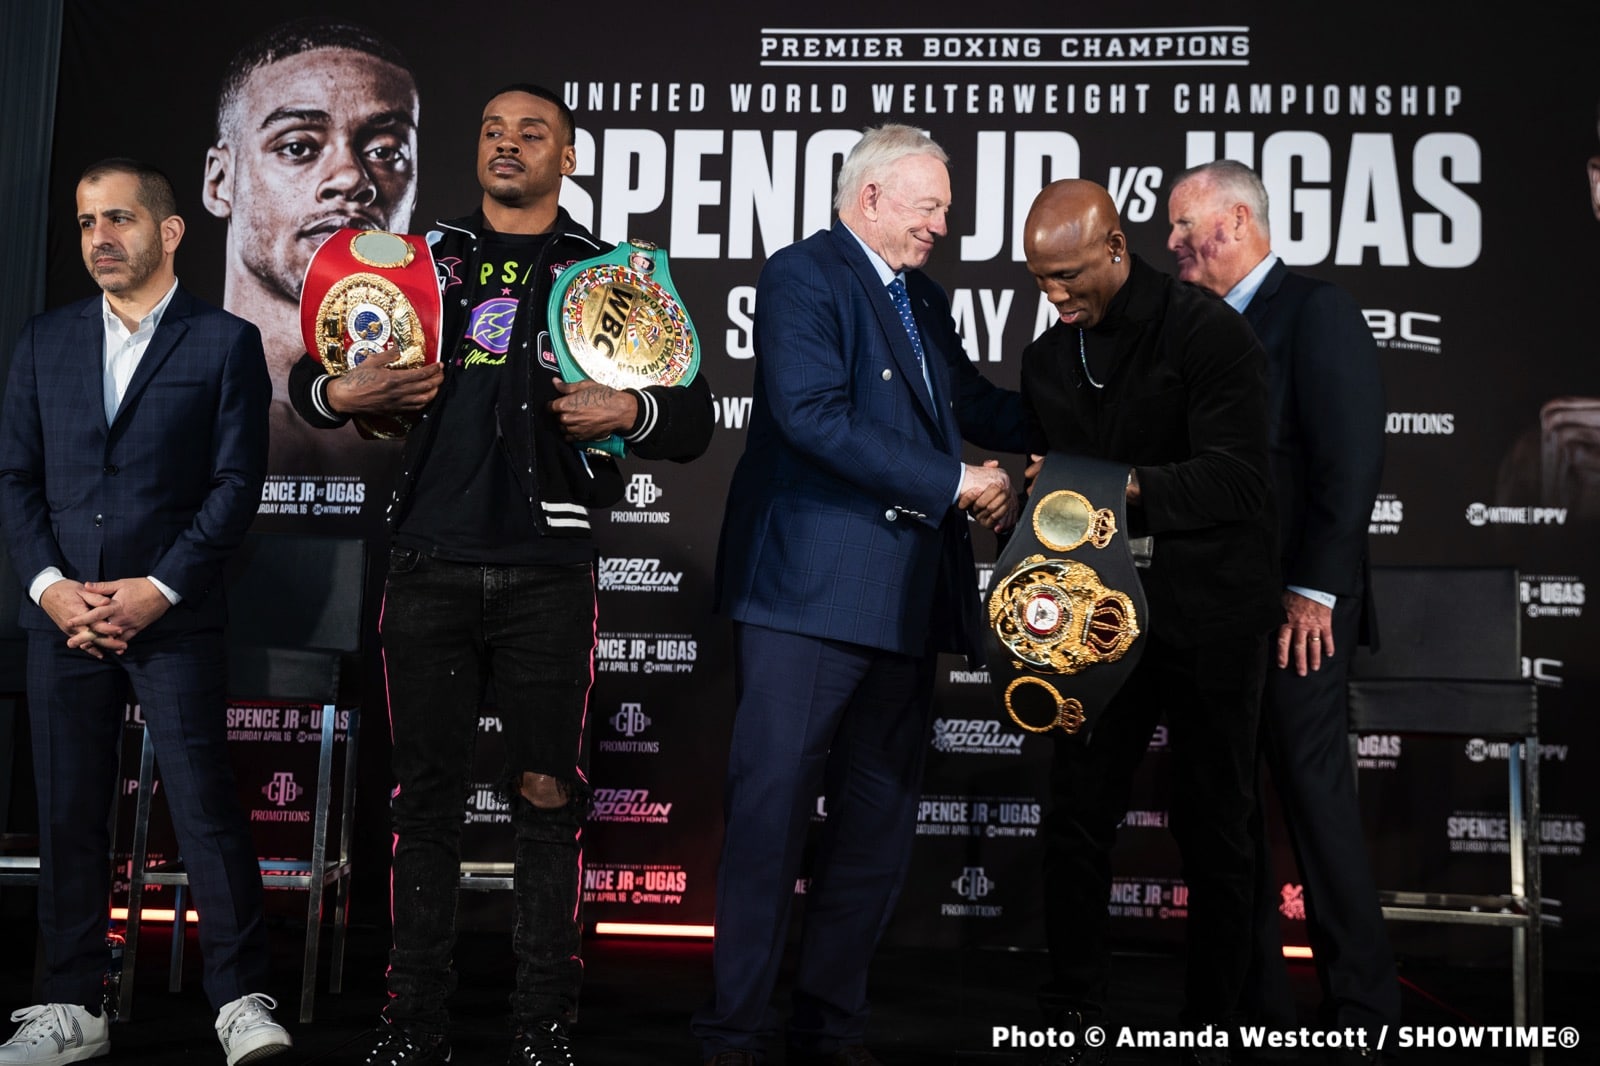 Errol Spence Jr, Manny Pacquiao, Yordenis Ugas boxing photo and news image